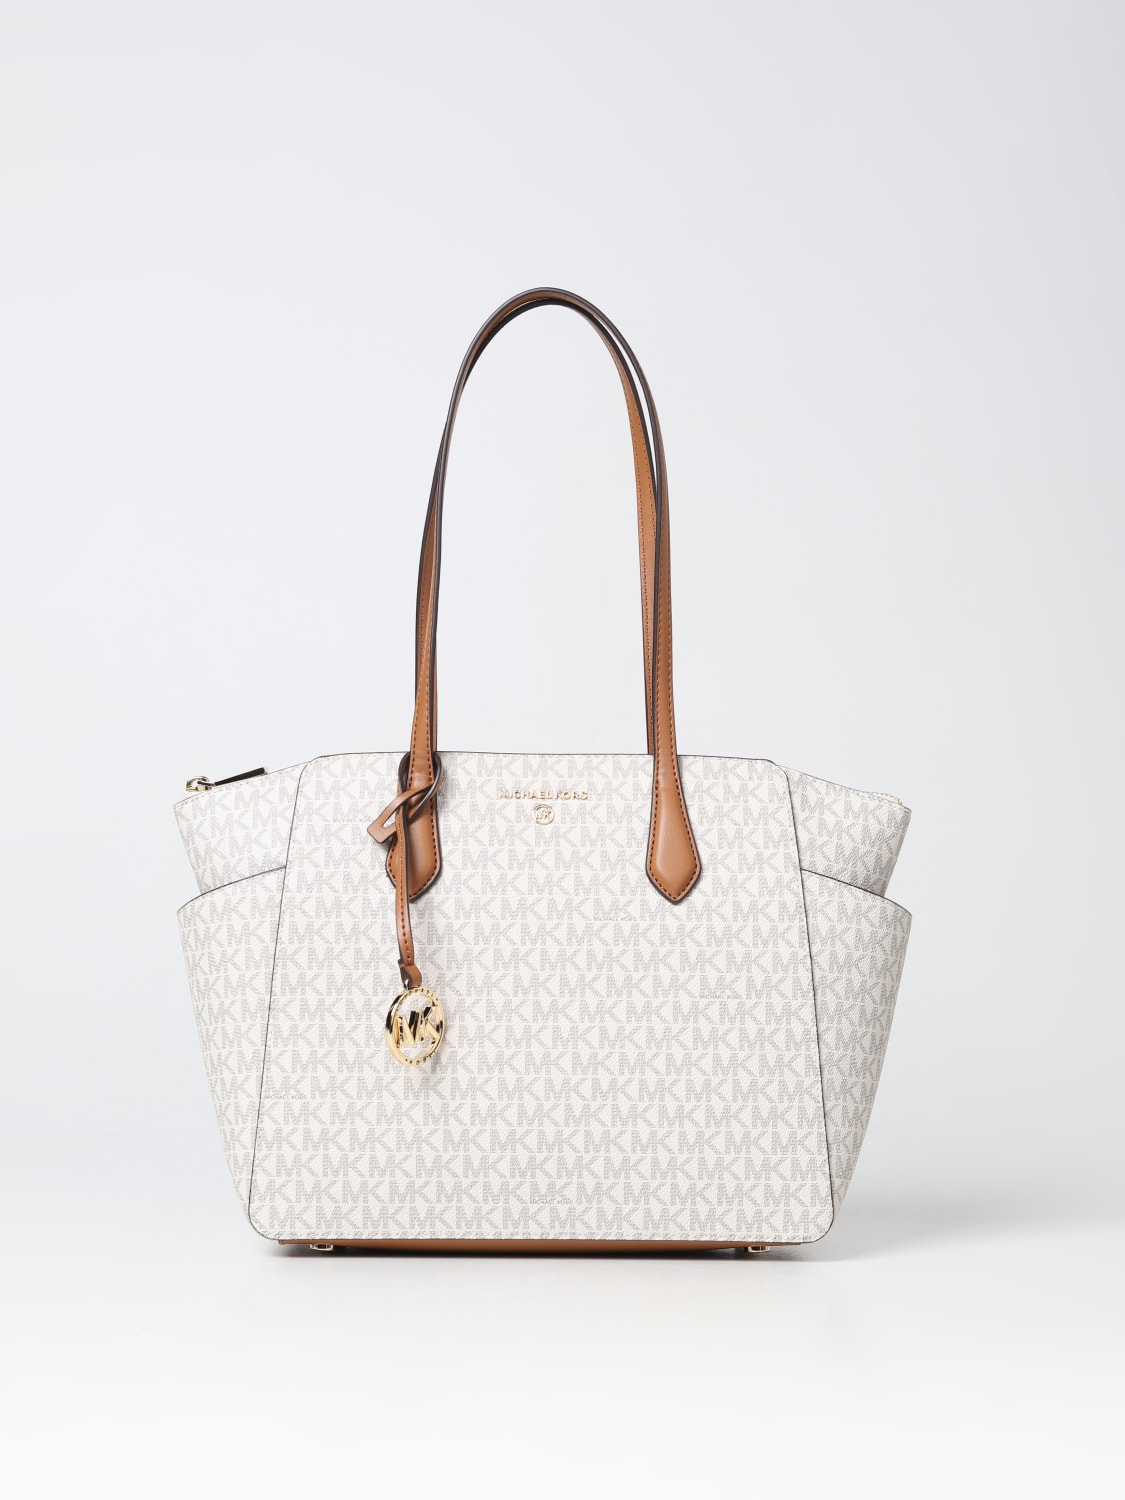 MICHAEL Michael Marylin bag in coated fabric with all over monogram - Cream Michael Kors tote bags online at GIGLIO.COM